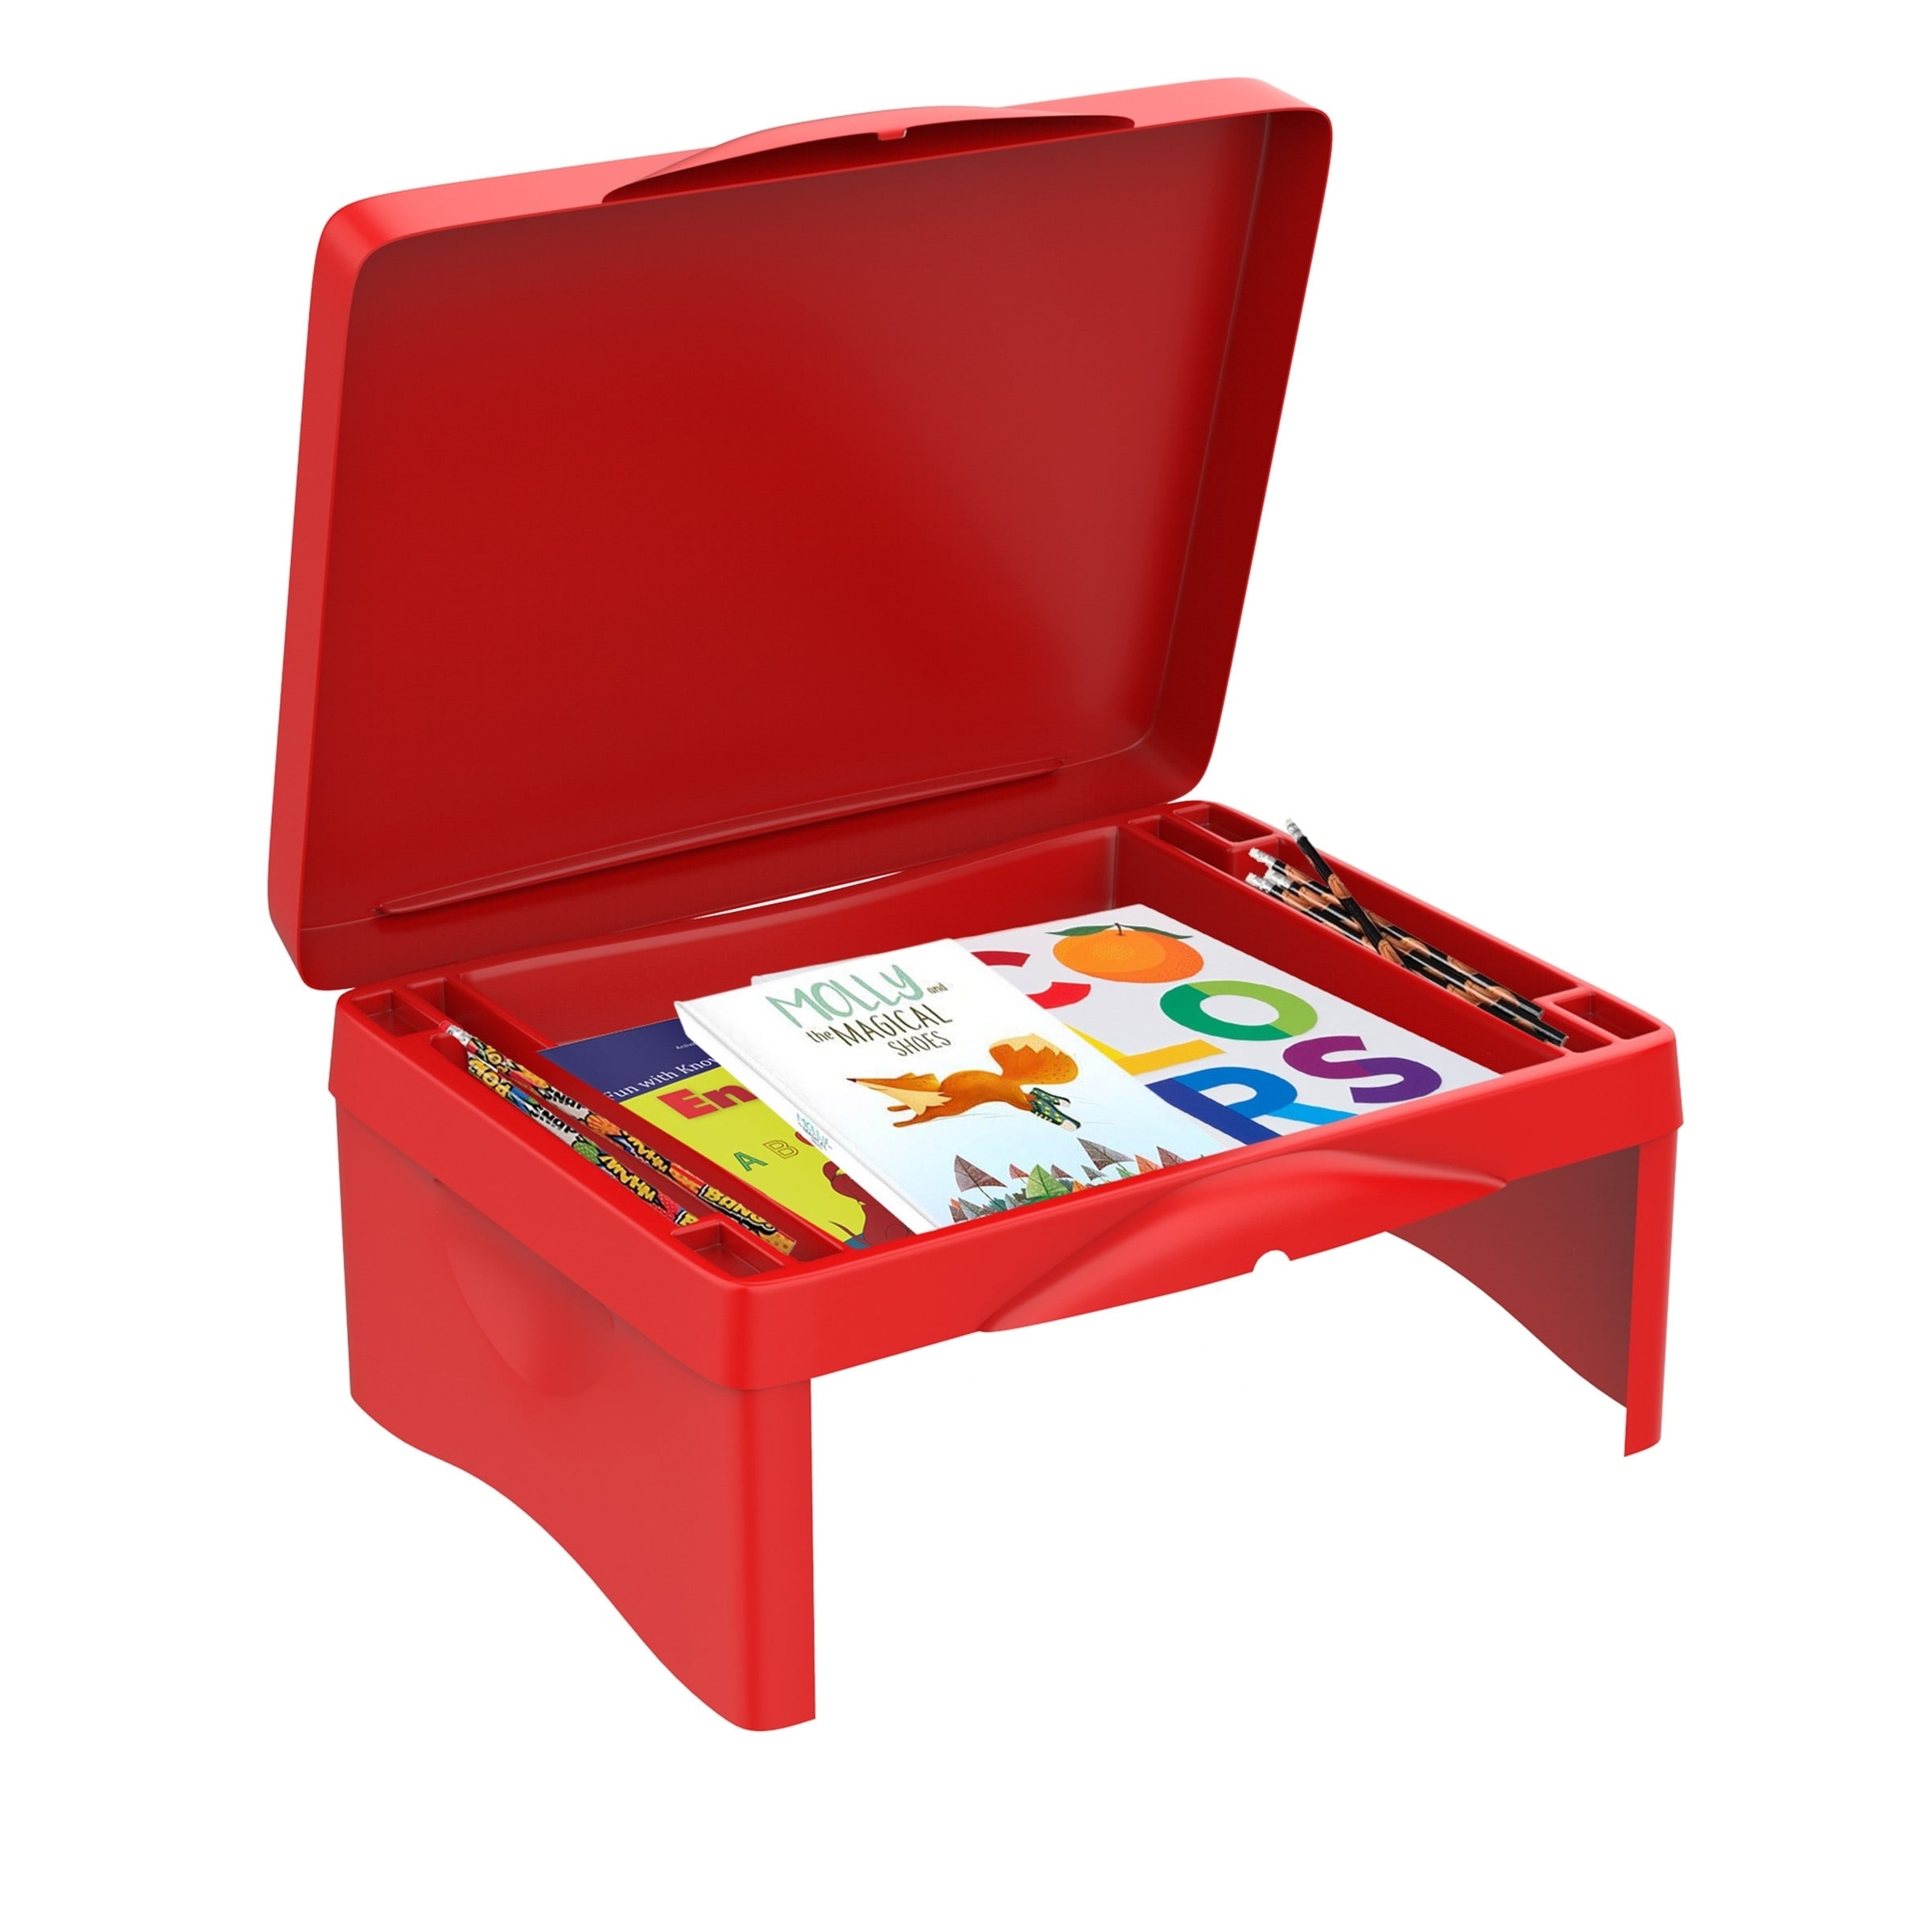 Shop Lap Desk For Kids Folding Collapsible Portable Table With